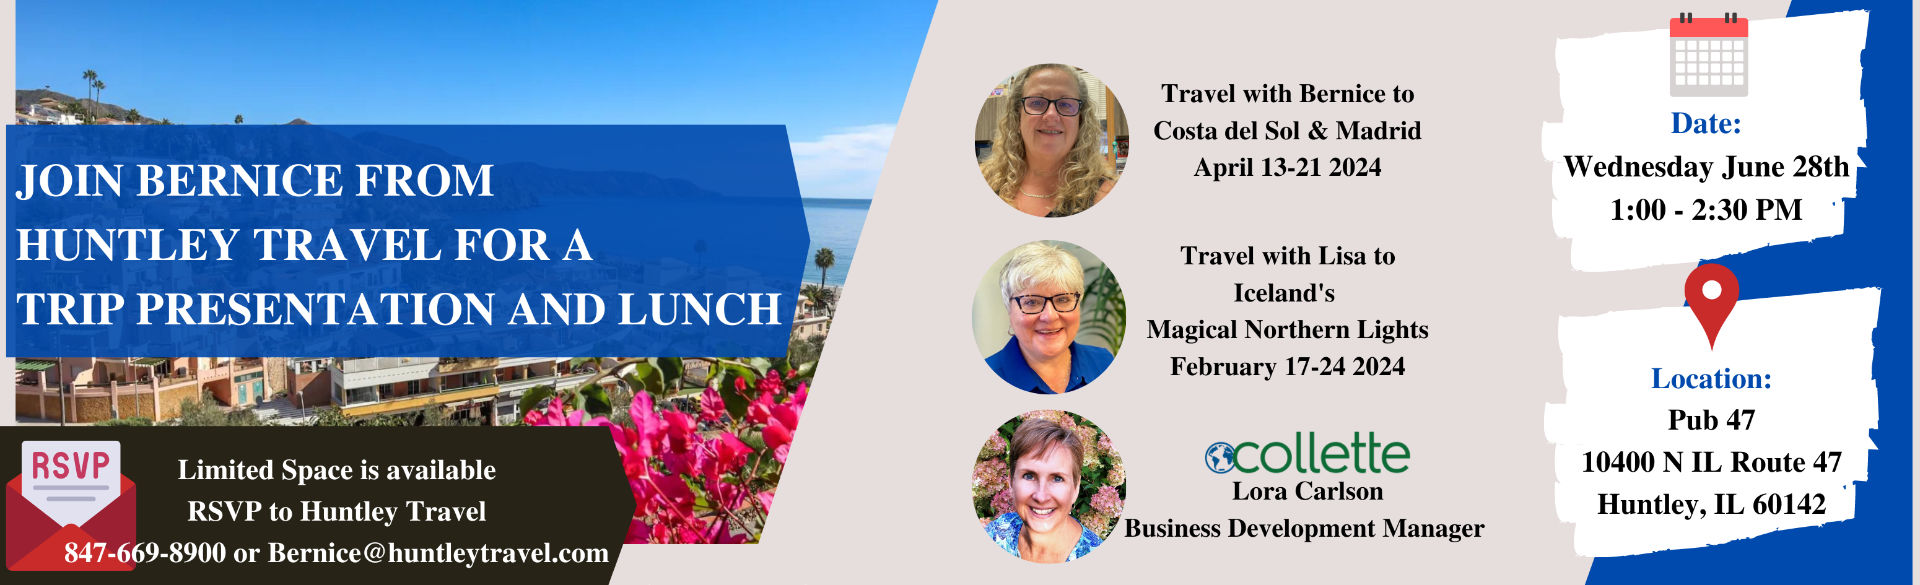 Join Bernice from Huntley Travel for a Trip Presentation and Lunch